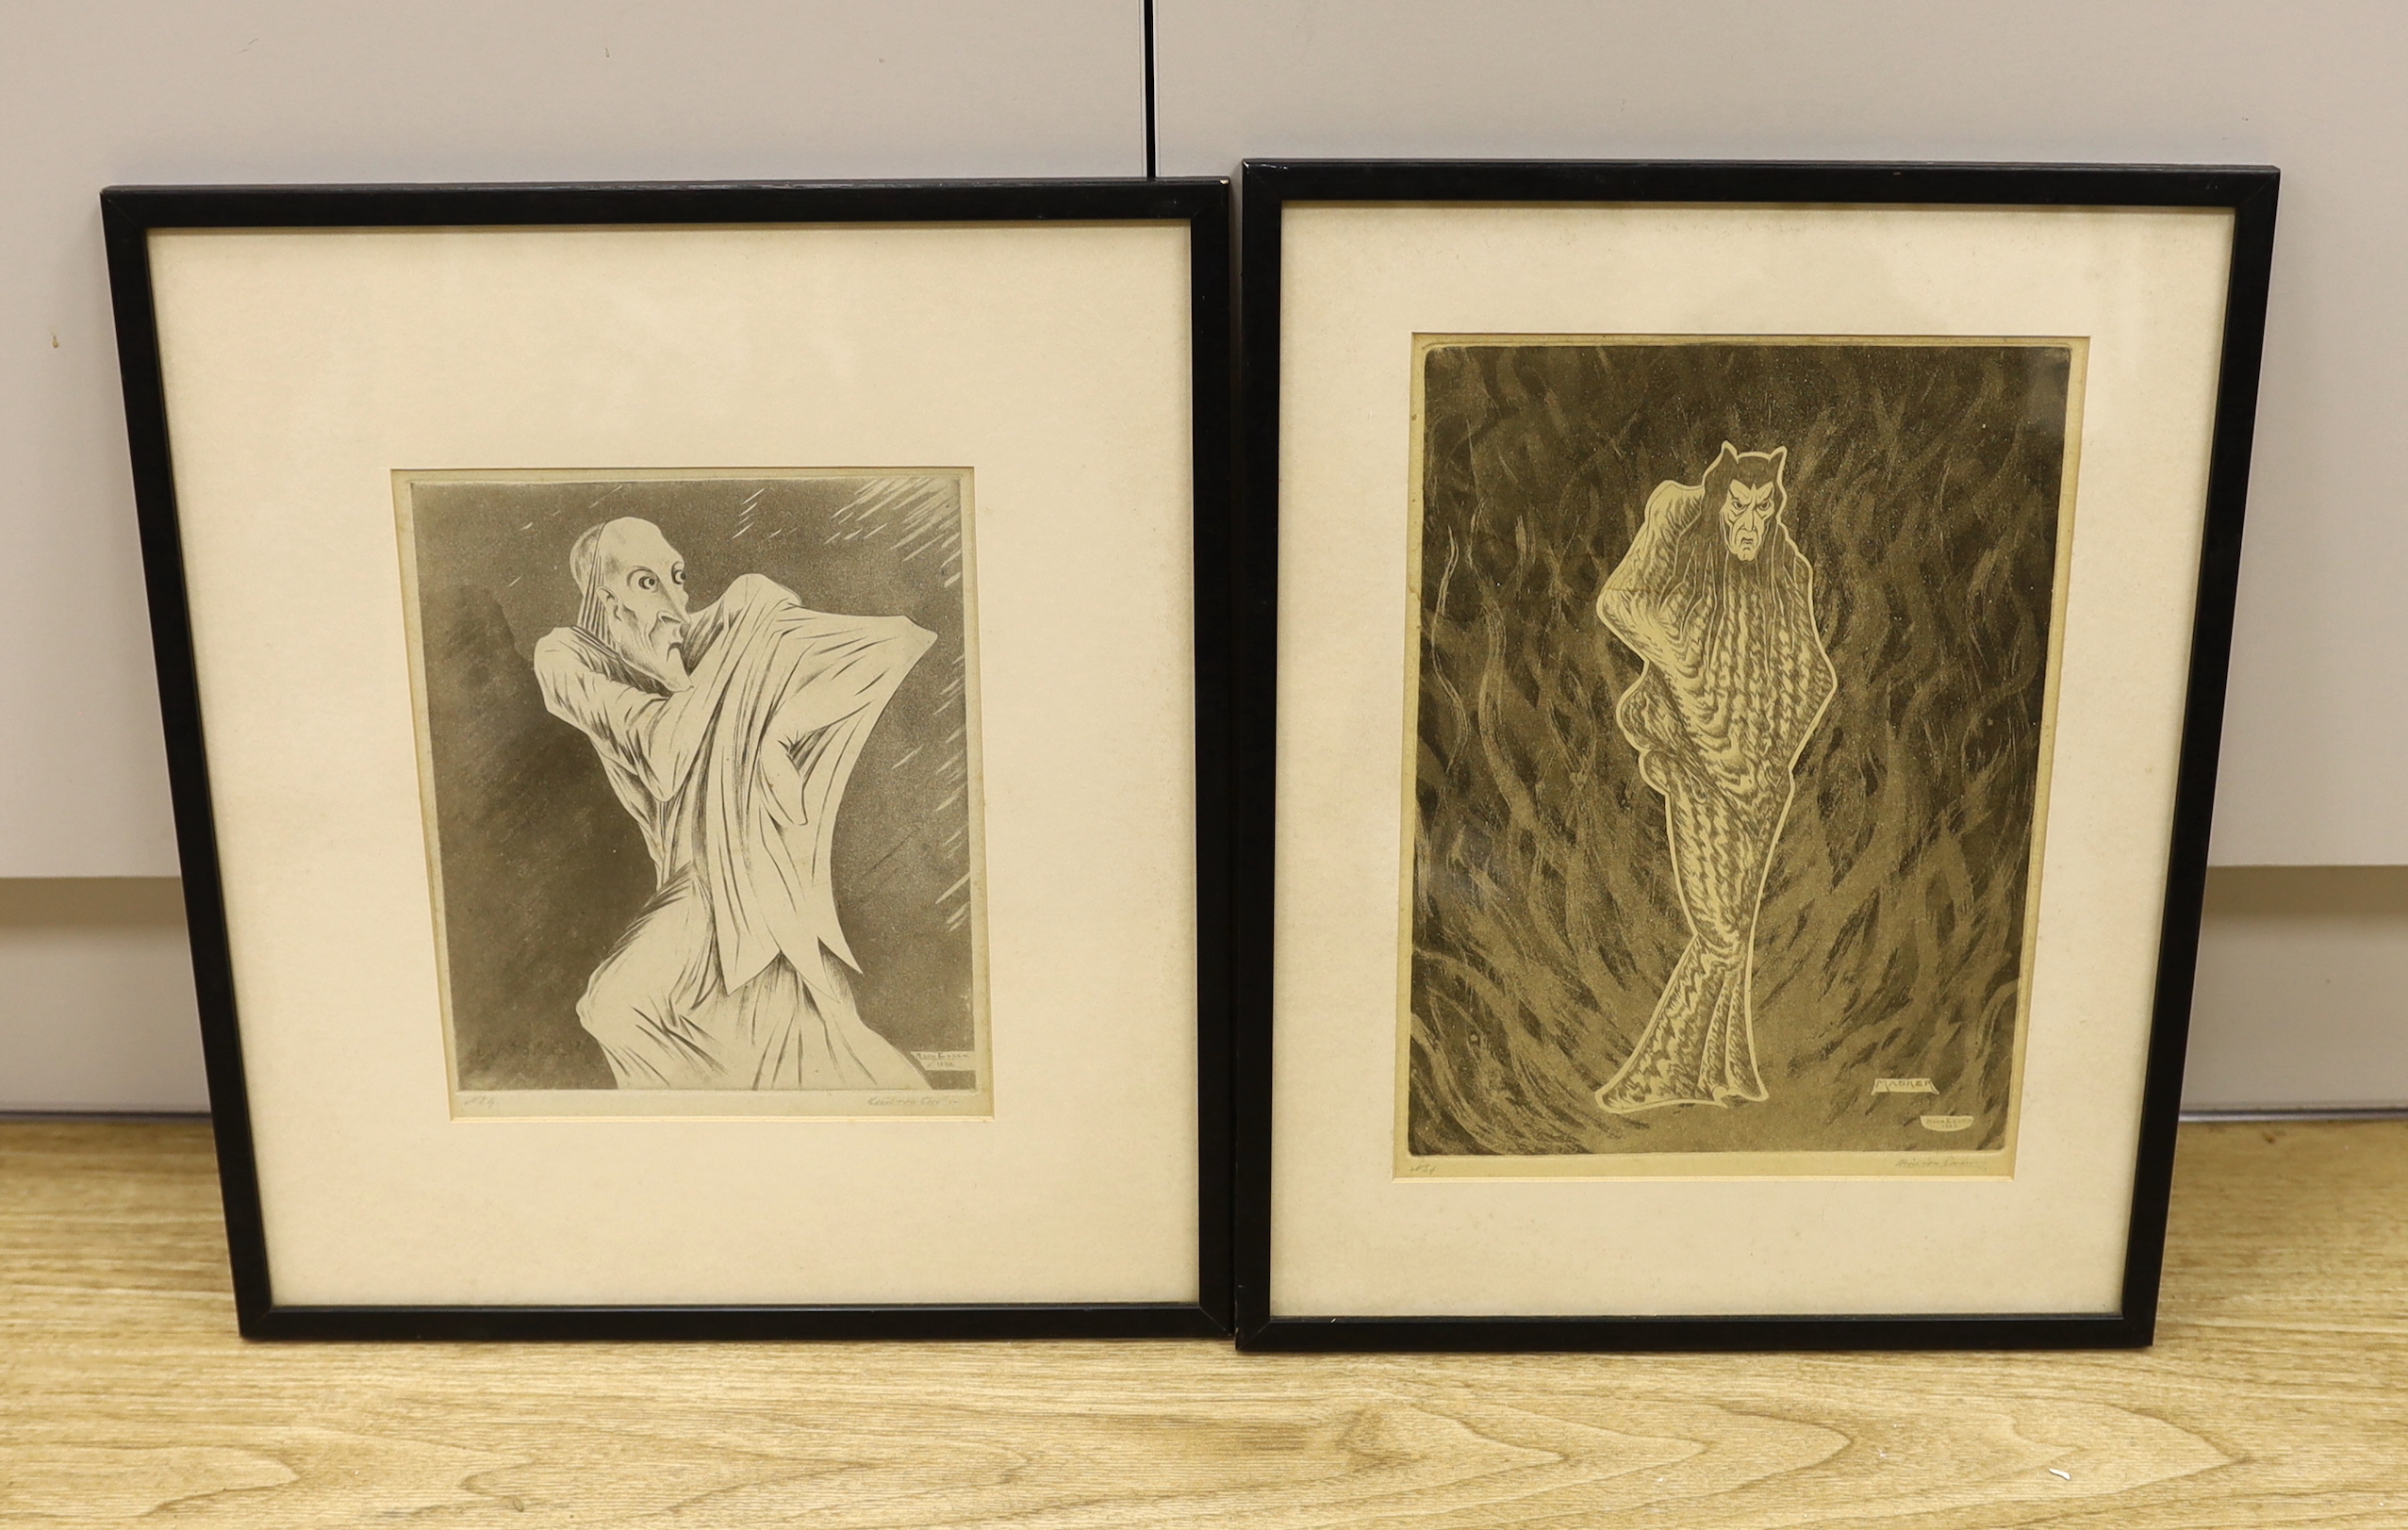 Hendrik Von Essen (1886-1947), two etchings, 'De Schichtige' and one other, each numbered 4 and signed in pencil, largest 31 x 22cm